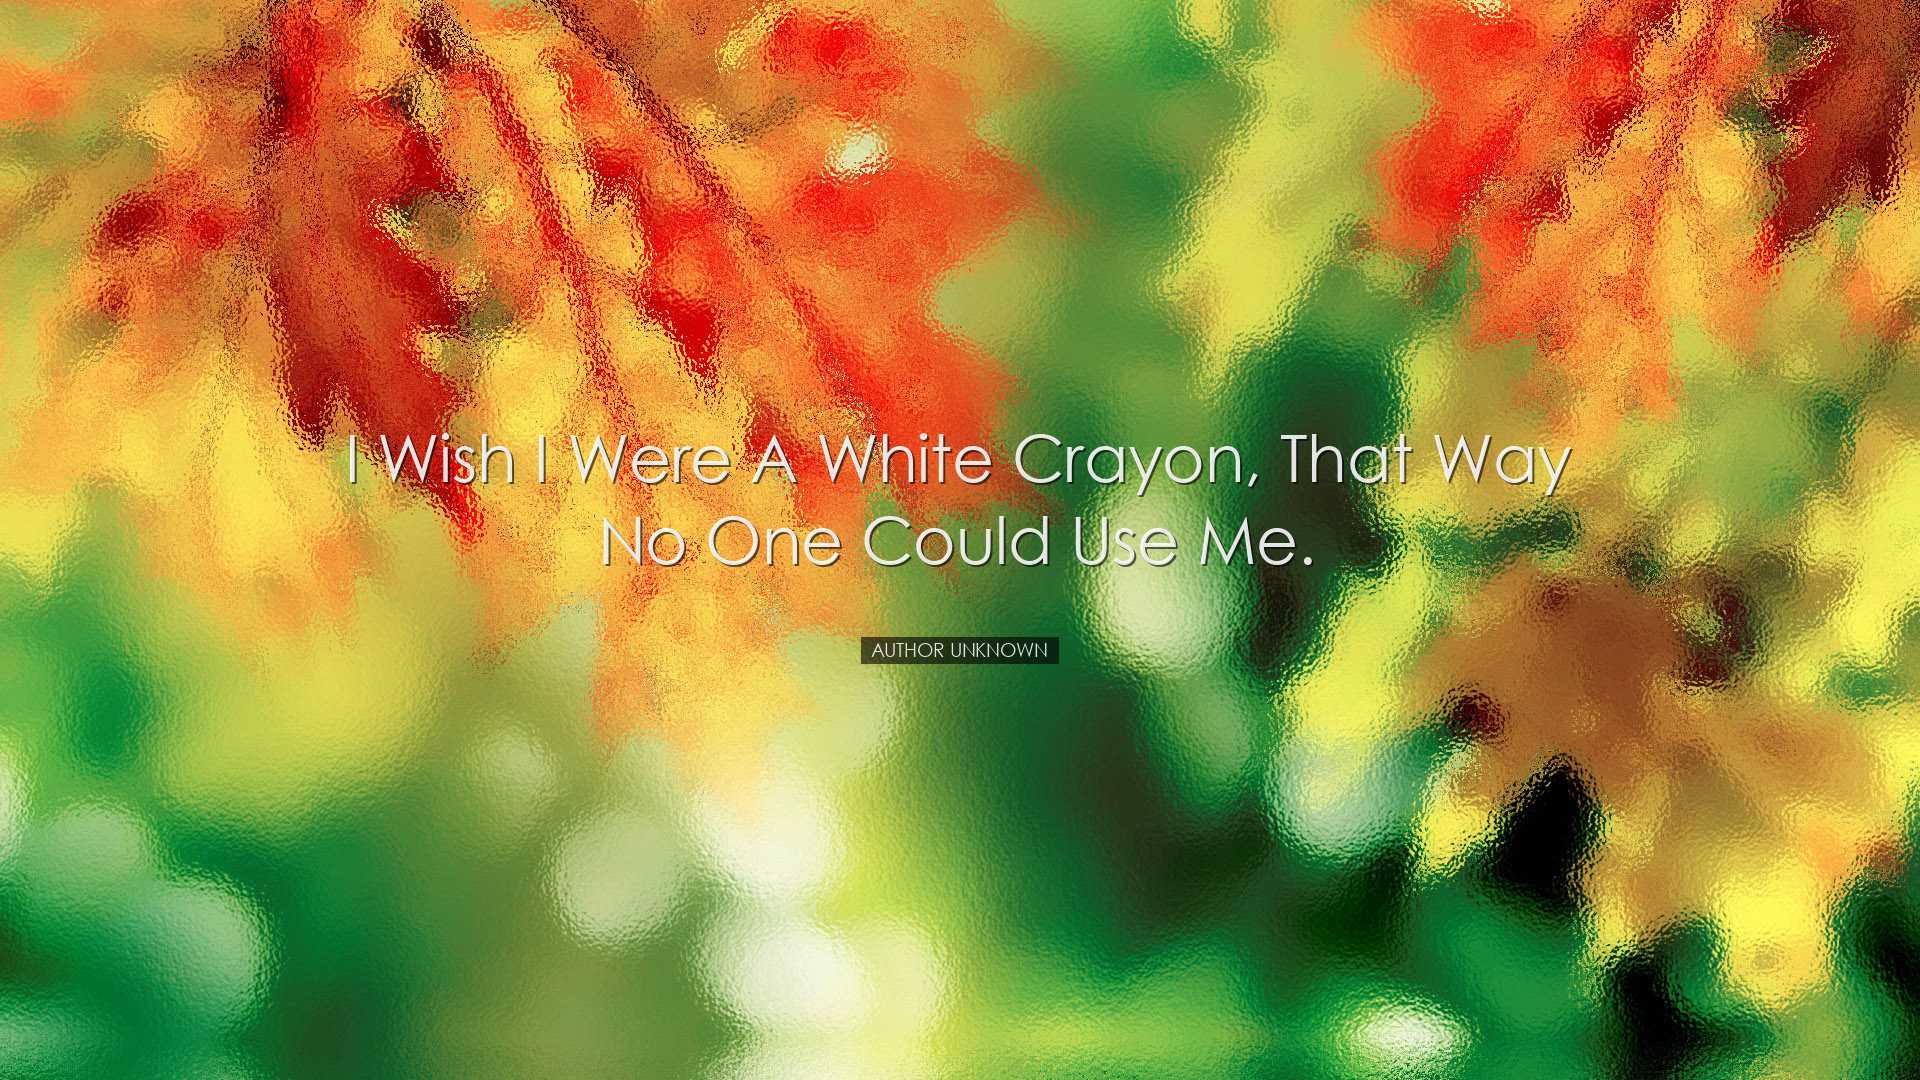 I wish I were a white crayon, that way no one could use me. - Auth